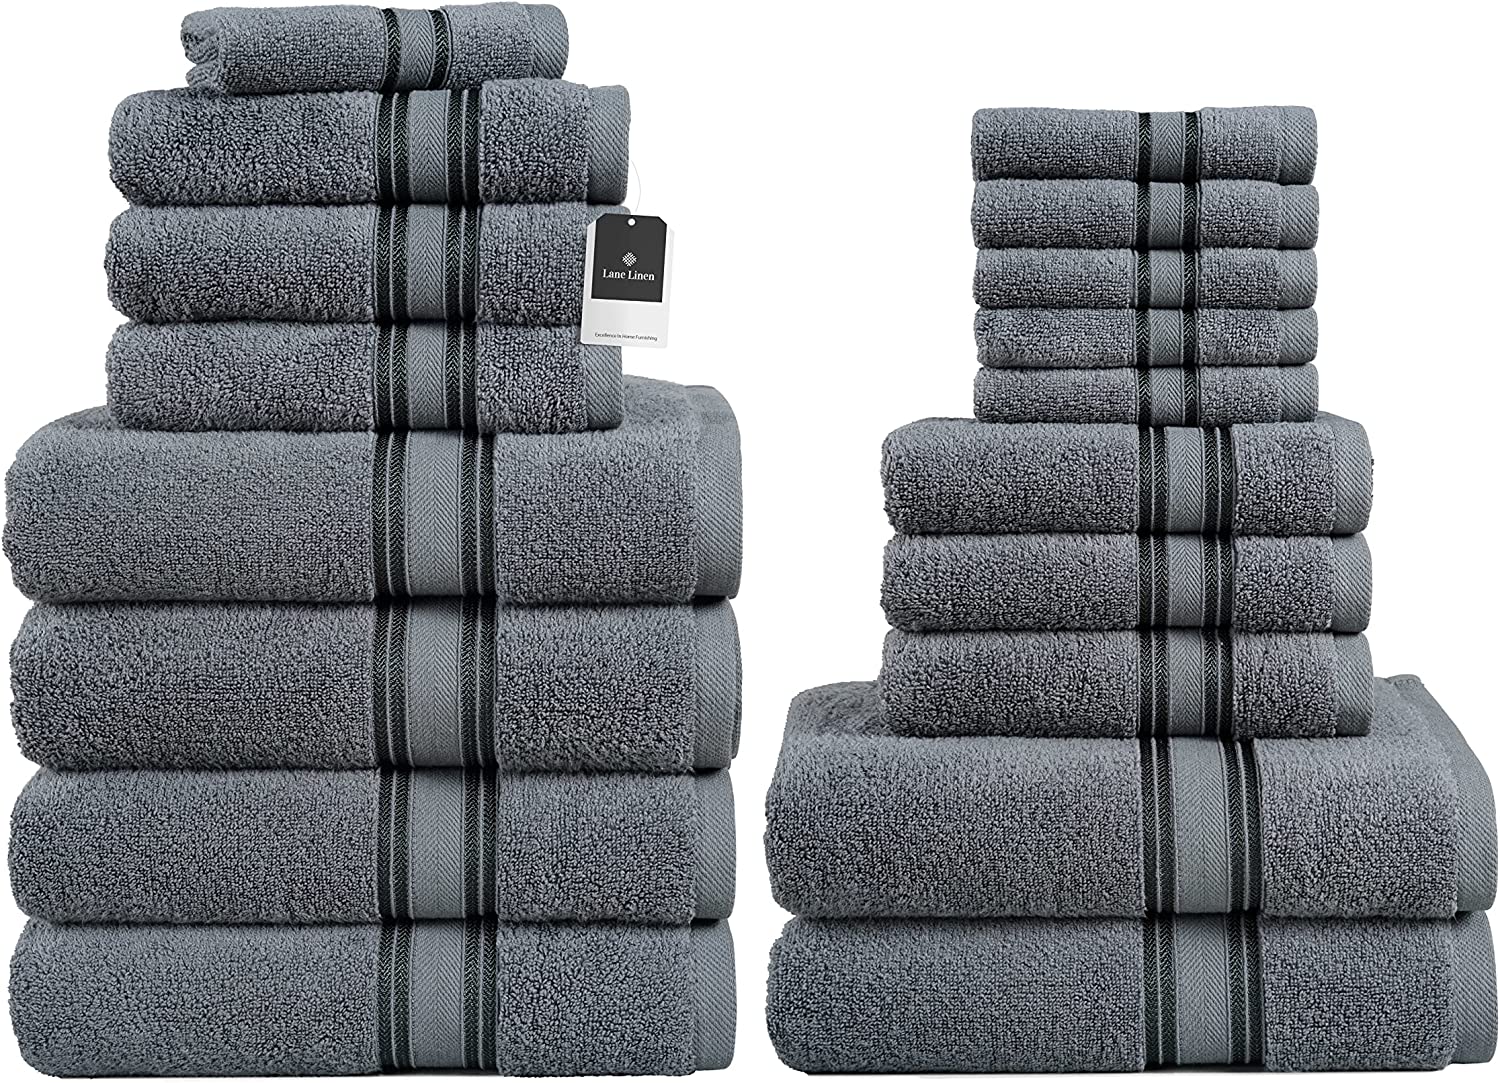 BELIZZI HOME 8 Piece Towel Set 100% Ring Spun Cotton, 2 Bath Towels 27x54,  2 Hand Towels 16x28 and 4 Washcloths 13x13 - Ultra Soft Highly Absorbent  Machine Washable Hotel Spa Quality - Chocolate Brown 